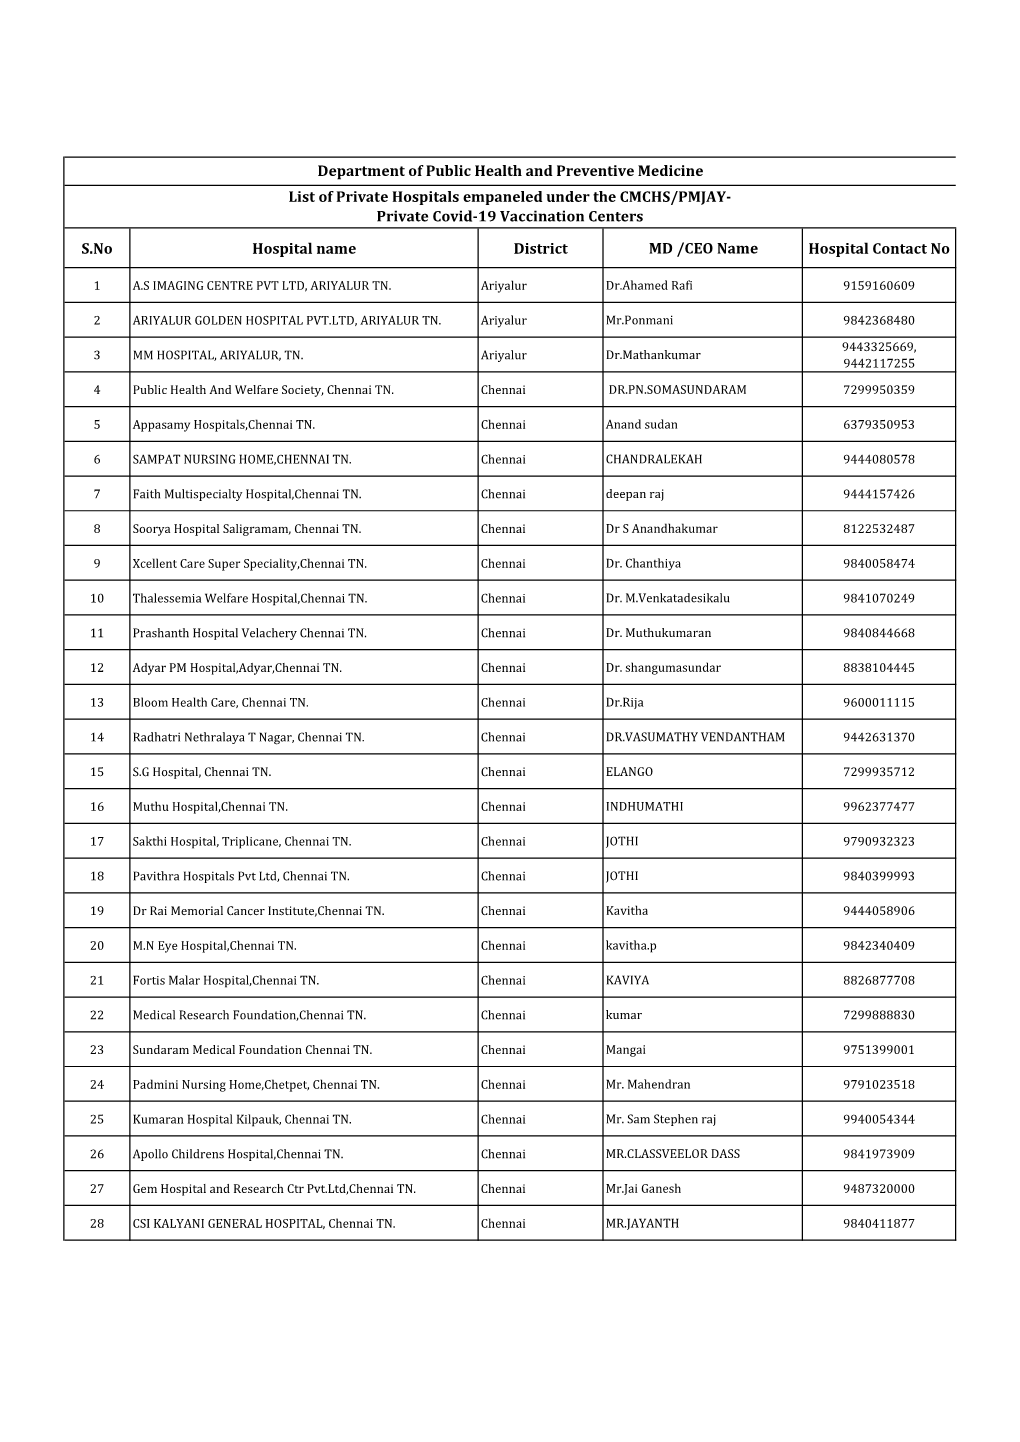 List of Private Hospitals Emphanel Under CMCHS and PMJAY